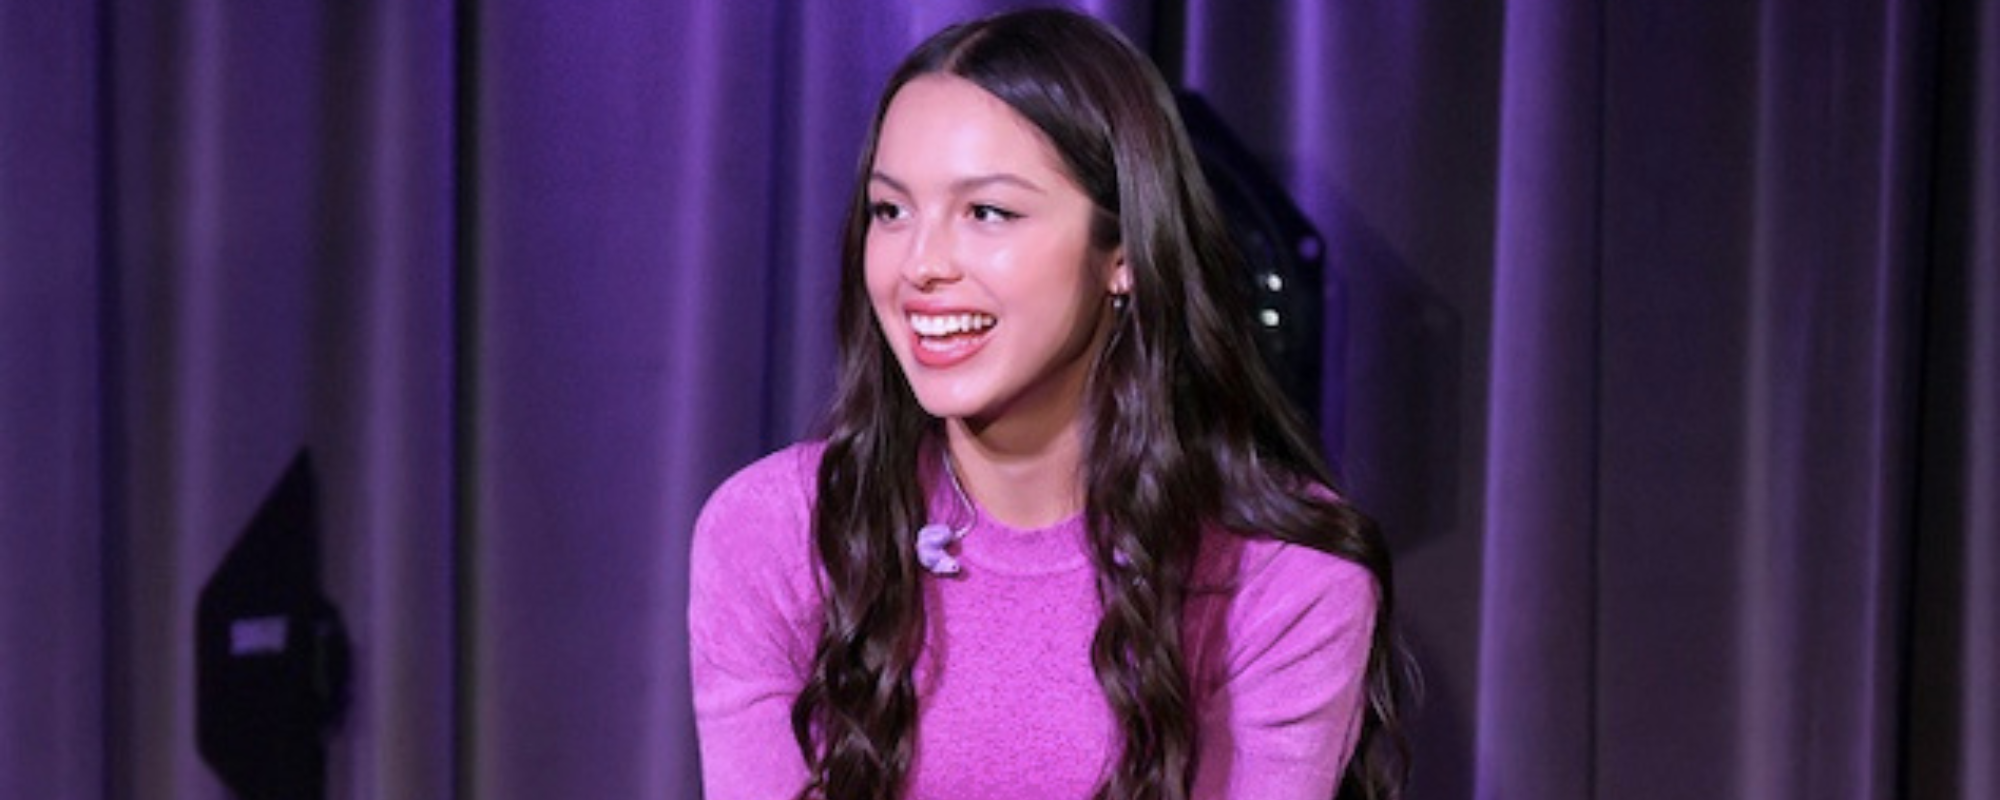 Olivia Rodrigo Slated to Perform Alongside “One of Her Heroes” at the 2023 Rock & Roll Hall of Fame Induction Ceremony